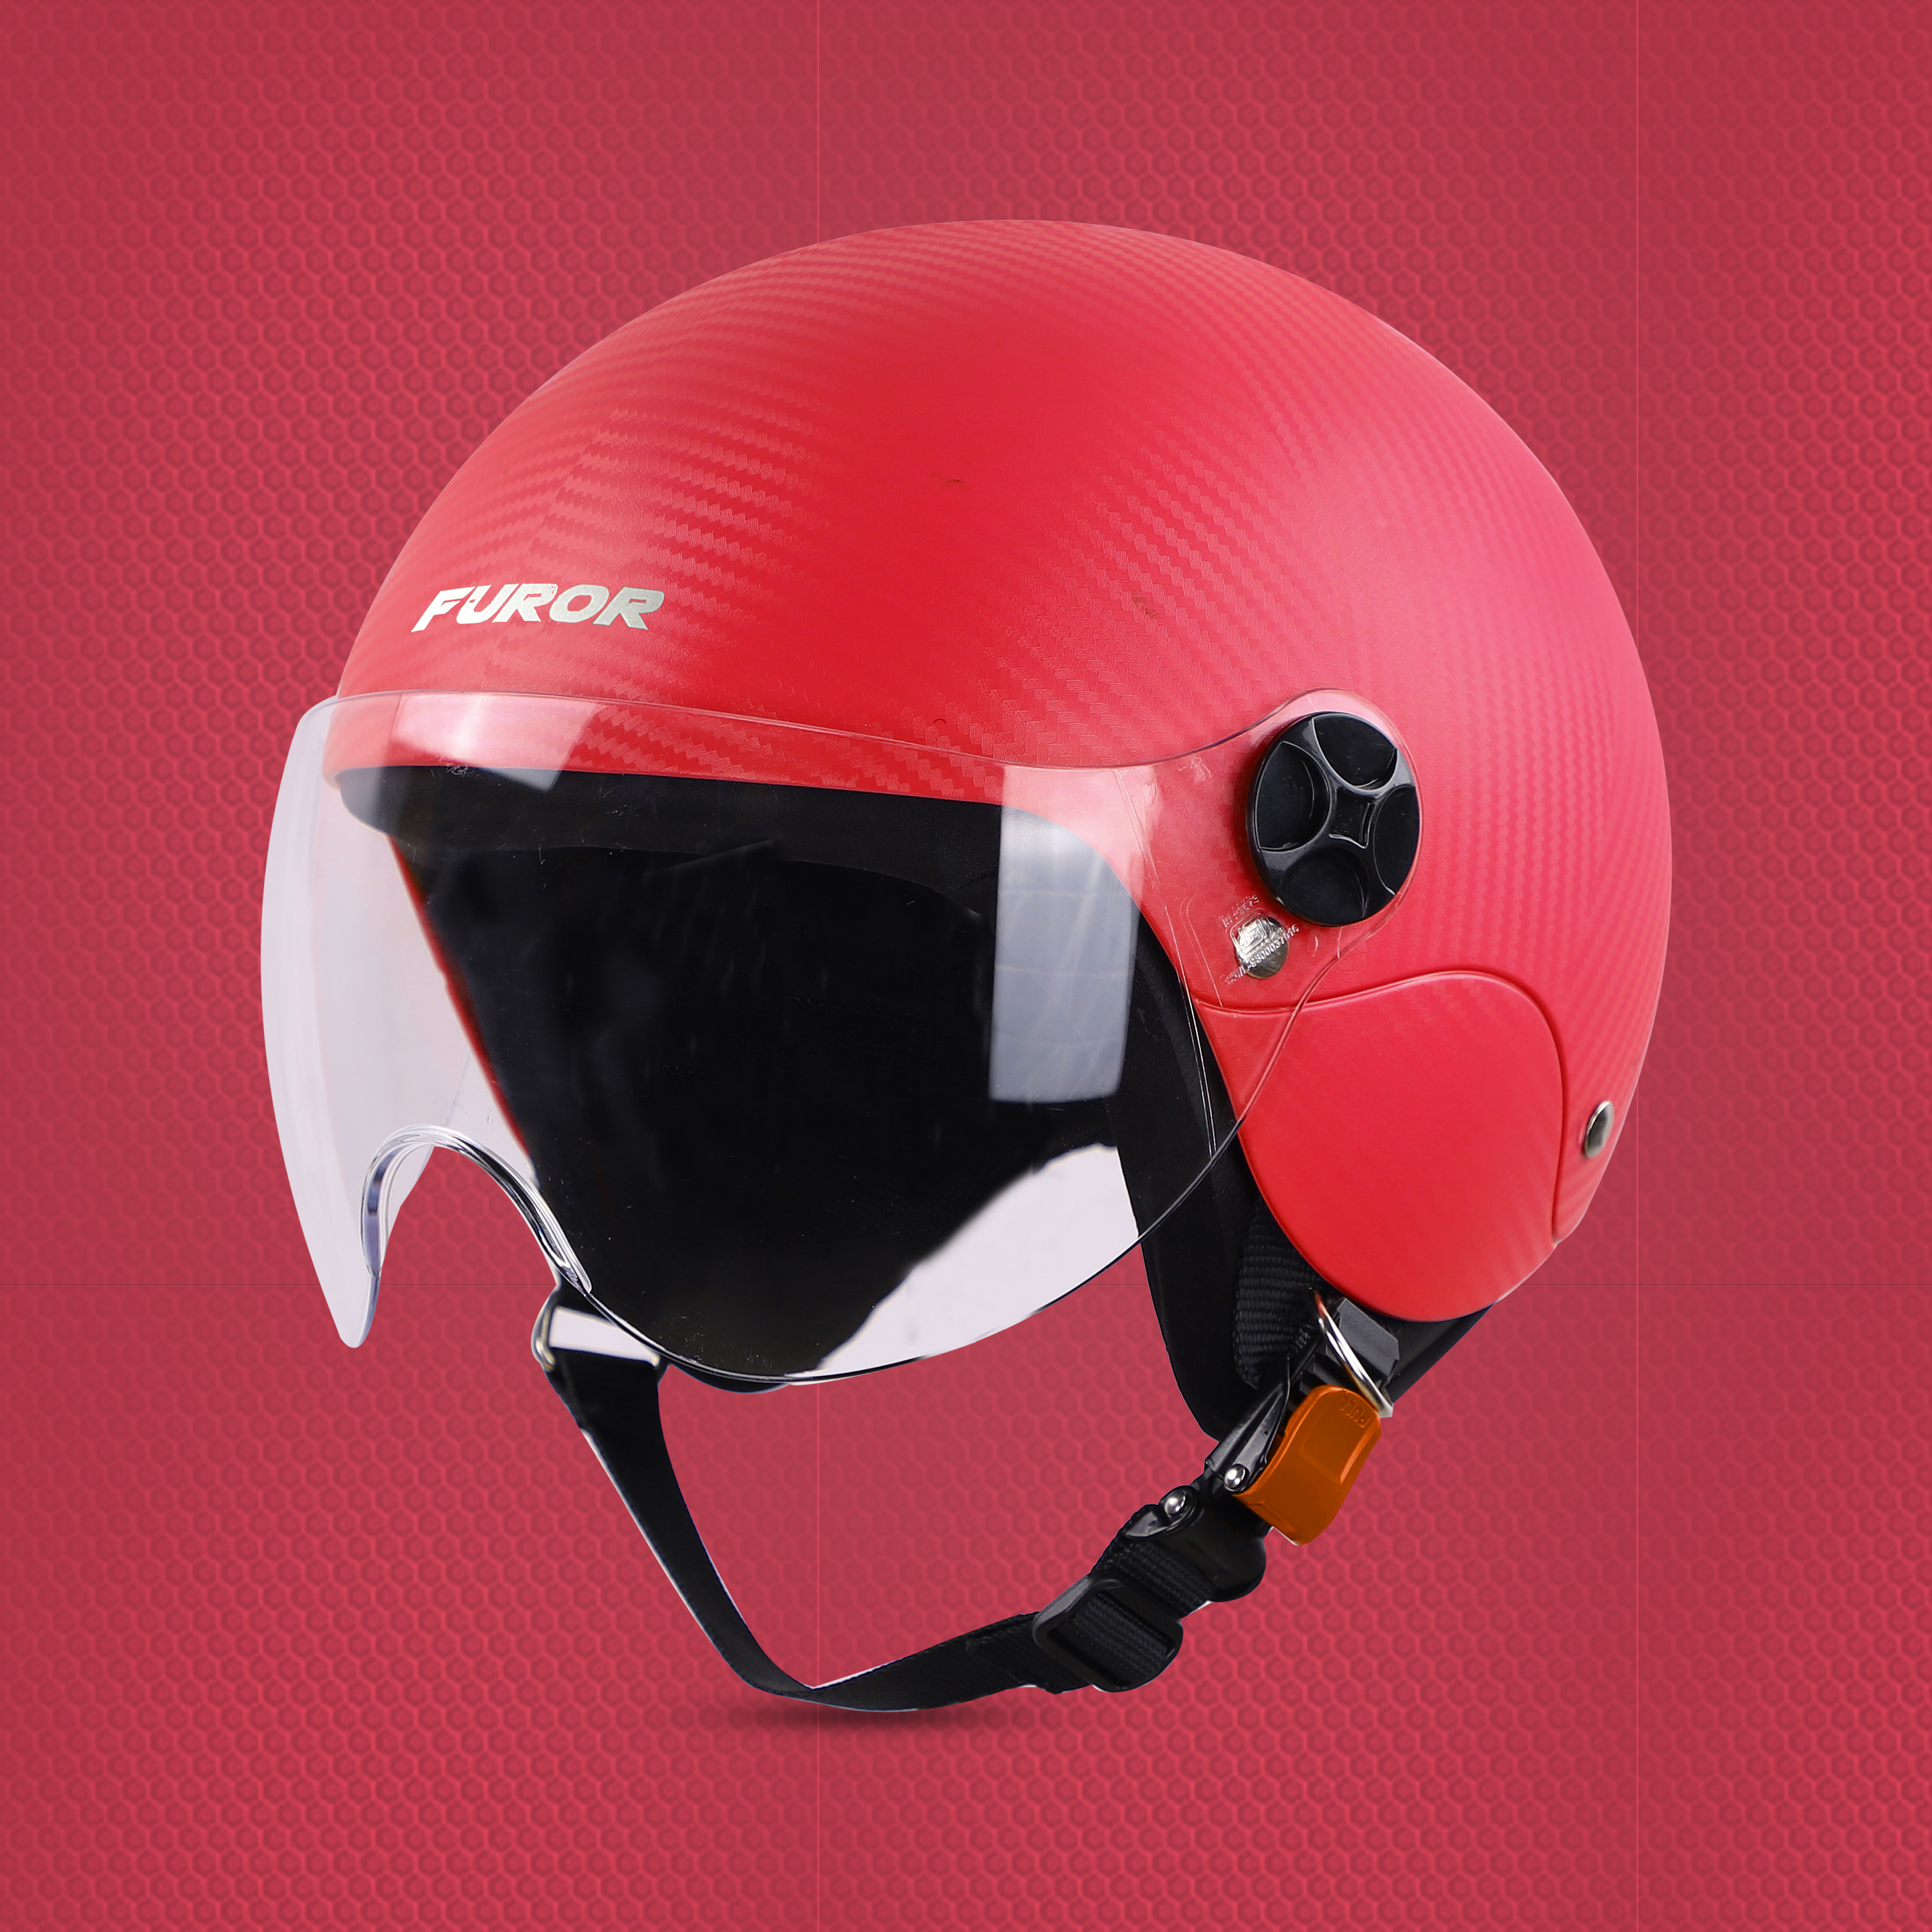 Steelbird SBH-16 Furor ISI Certified Open Face Helmet (Dashing Red With Clear Visor)